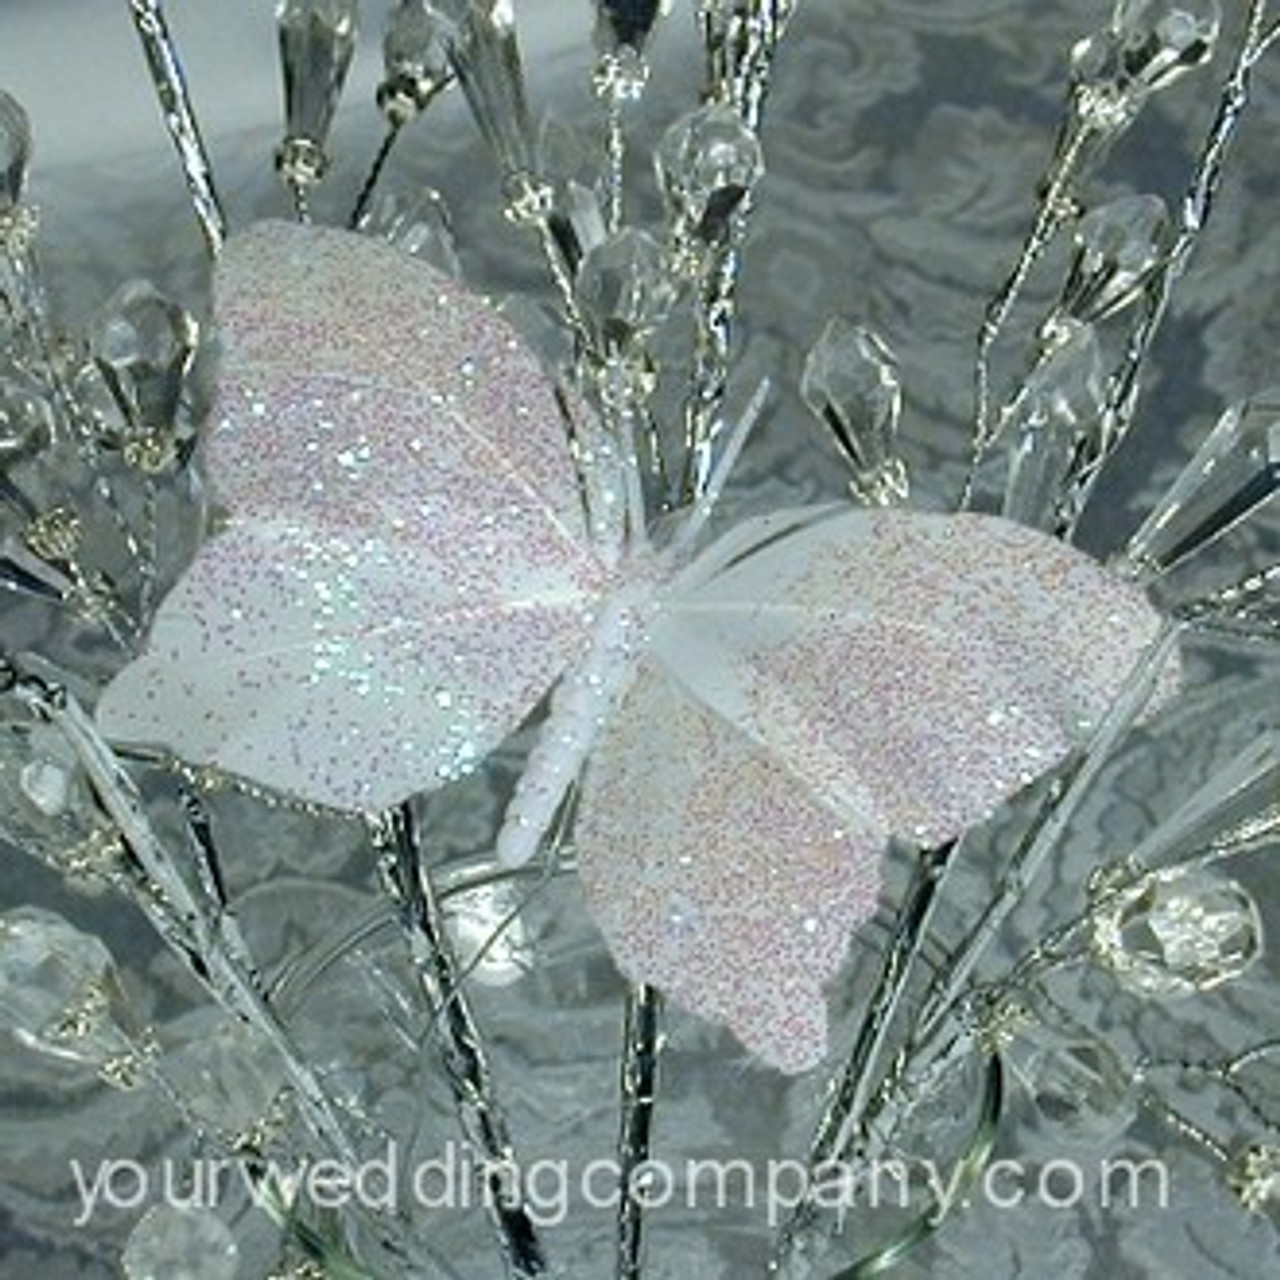 Decorate these white feathers with markers, paints, glitter and